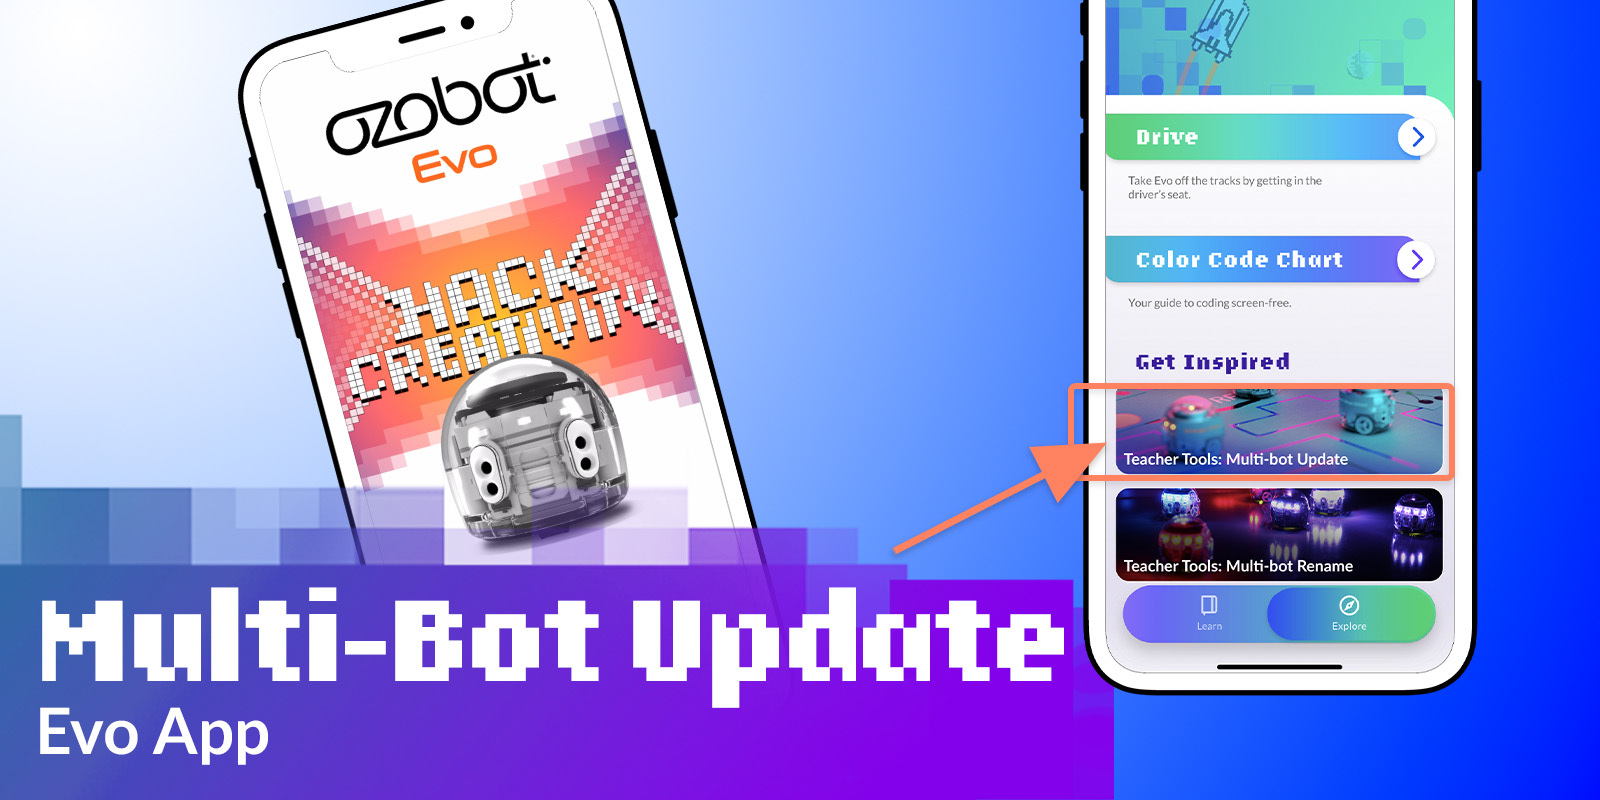 Multi-Bot Update & Renaming Using the Evo App for Android Users